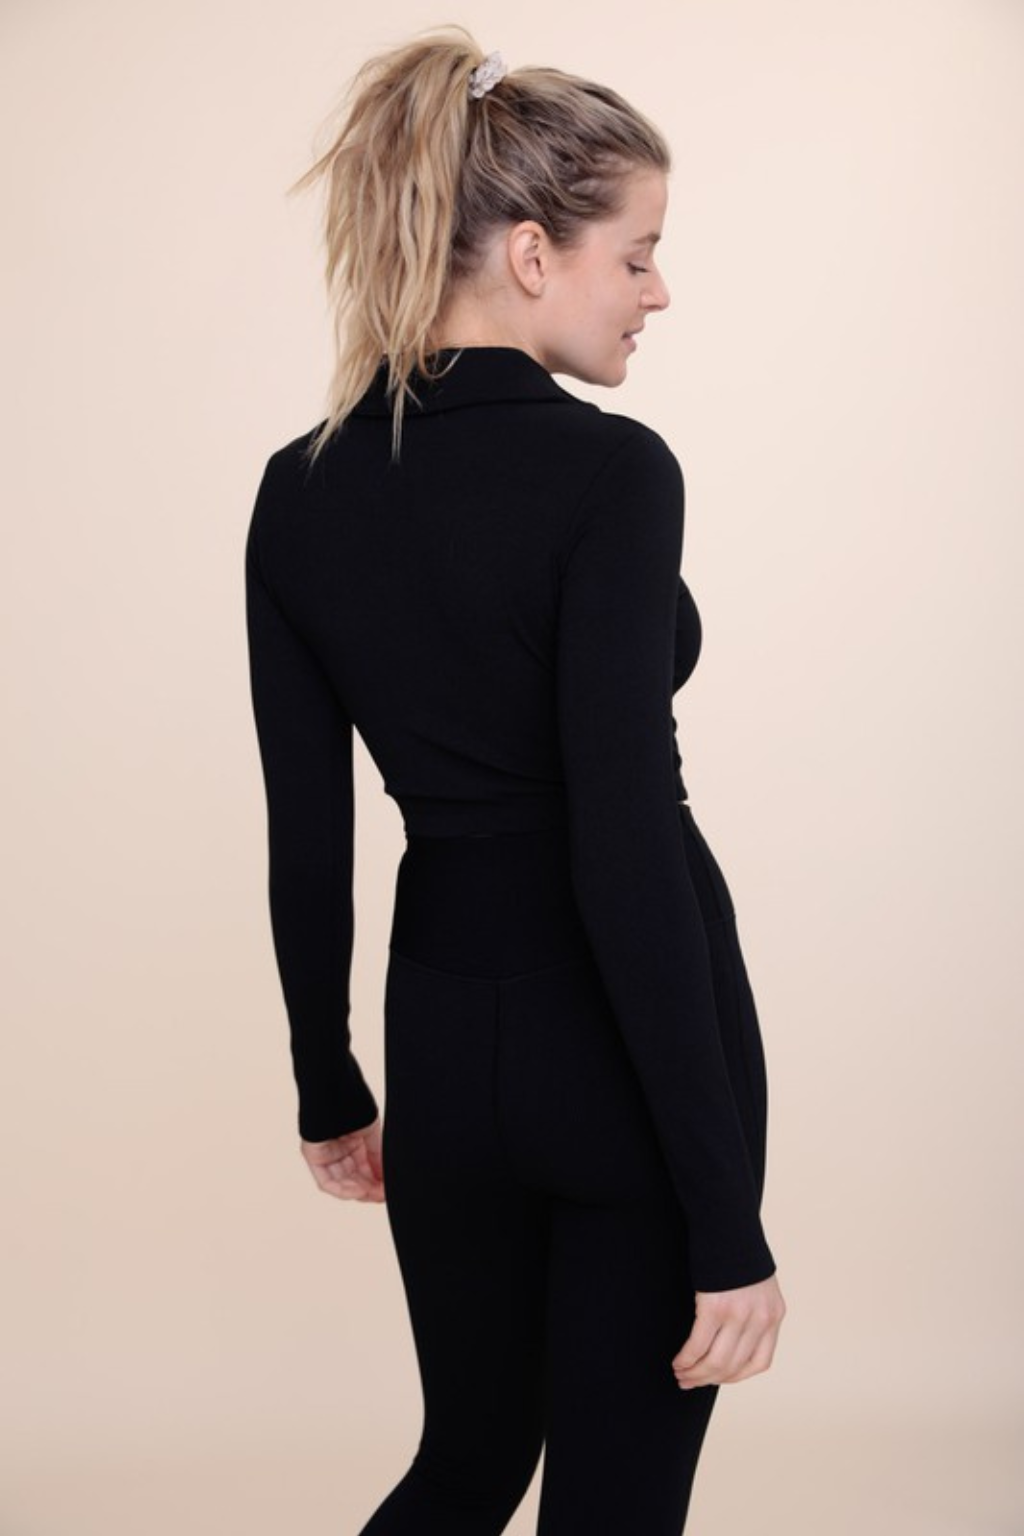 The silhouette of our dreams. This cropped long sleeve comes in our ribbed material and has the chicest polo collar. Pair it with leggings for the perfect performance outfit.